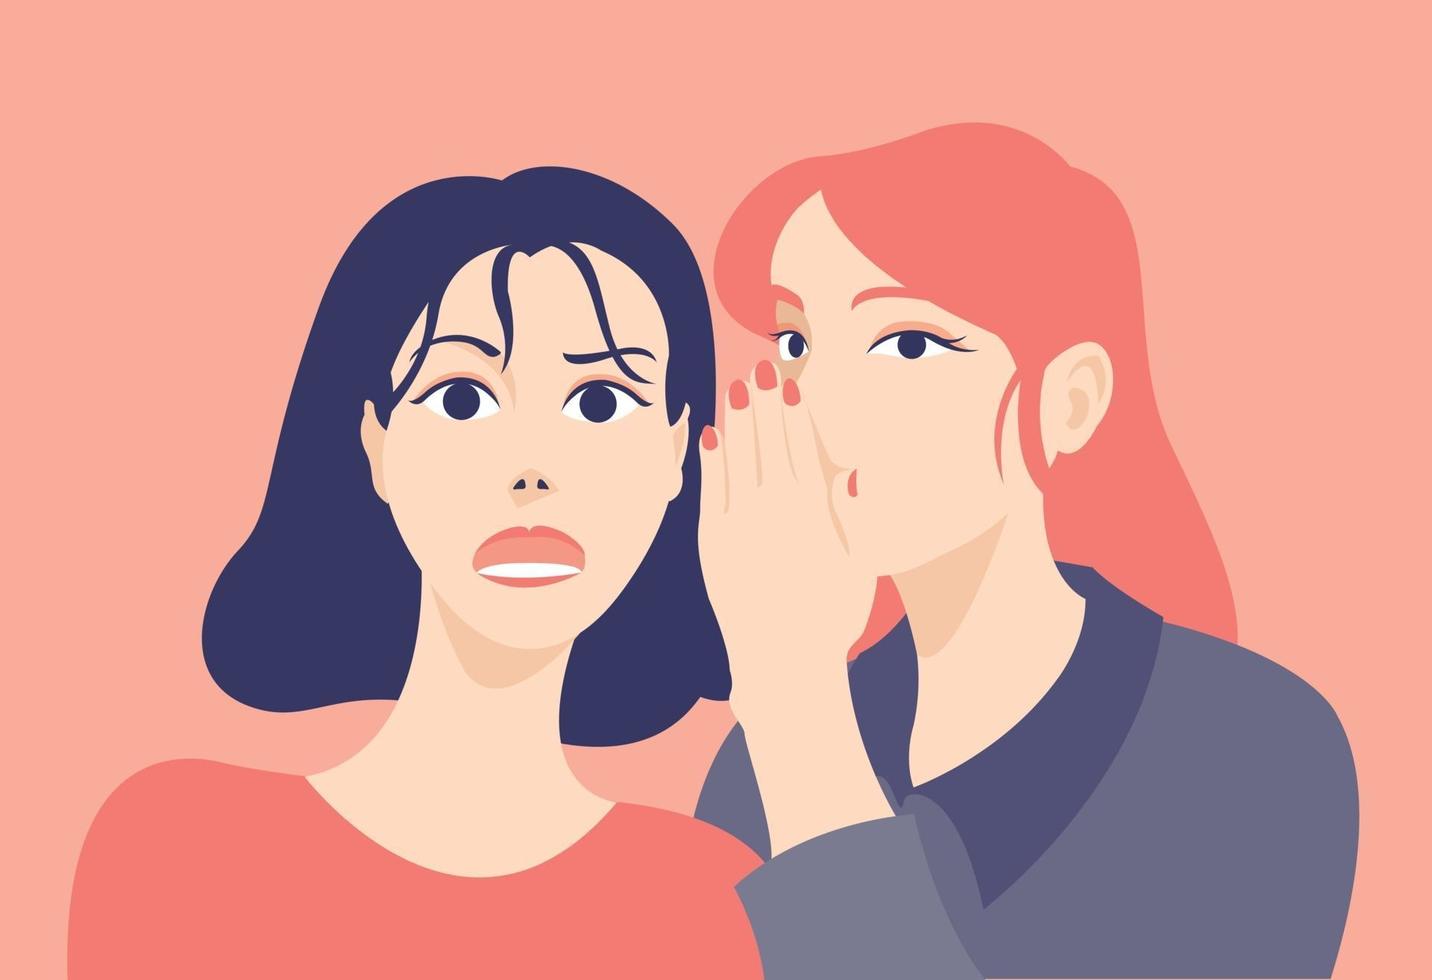 One woman is telling a secret to another woman's ear. hand drawn style vector design illustrations.